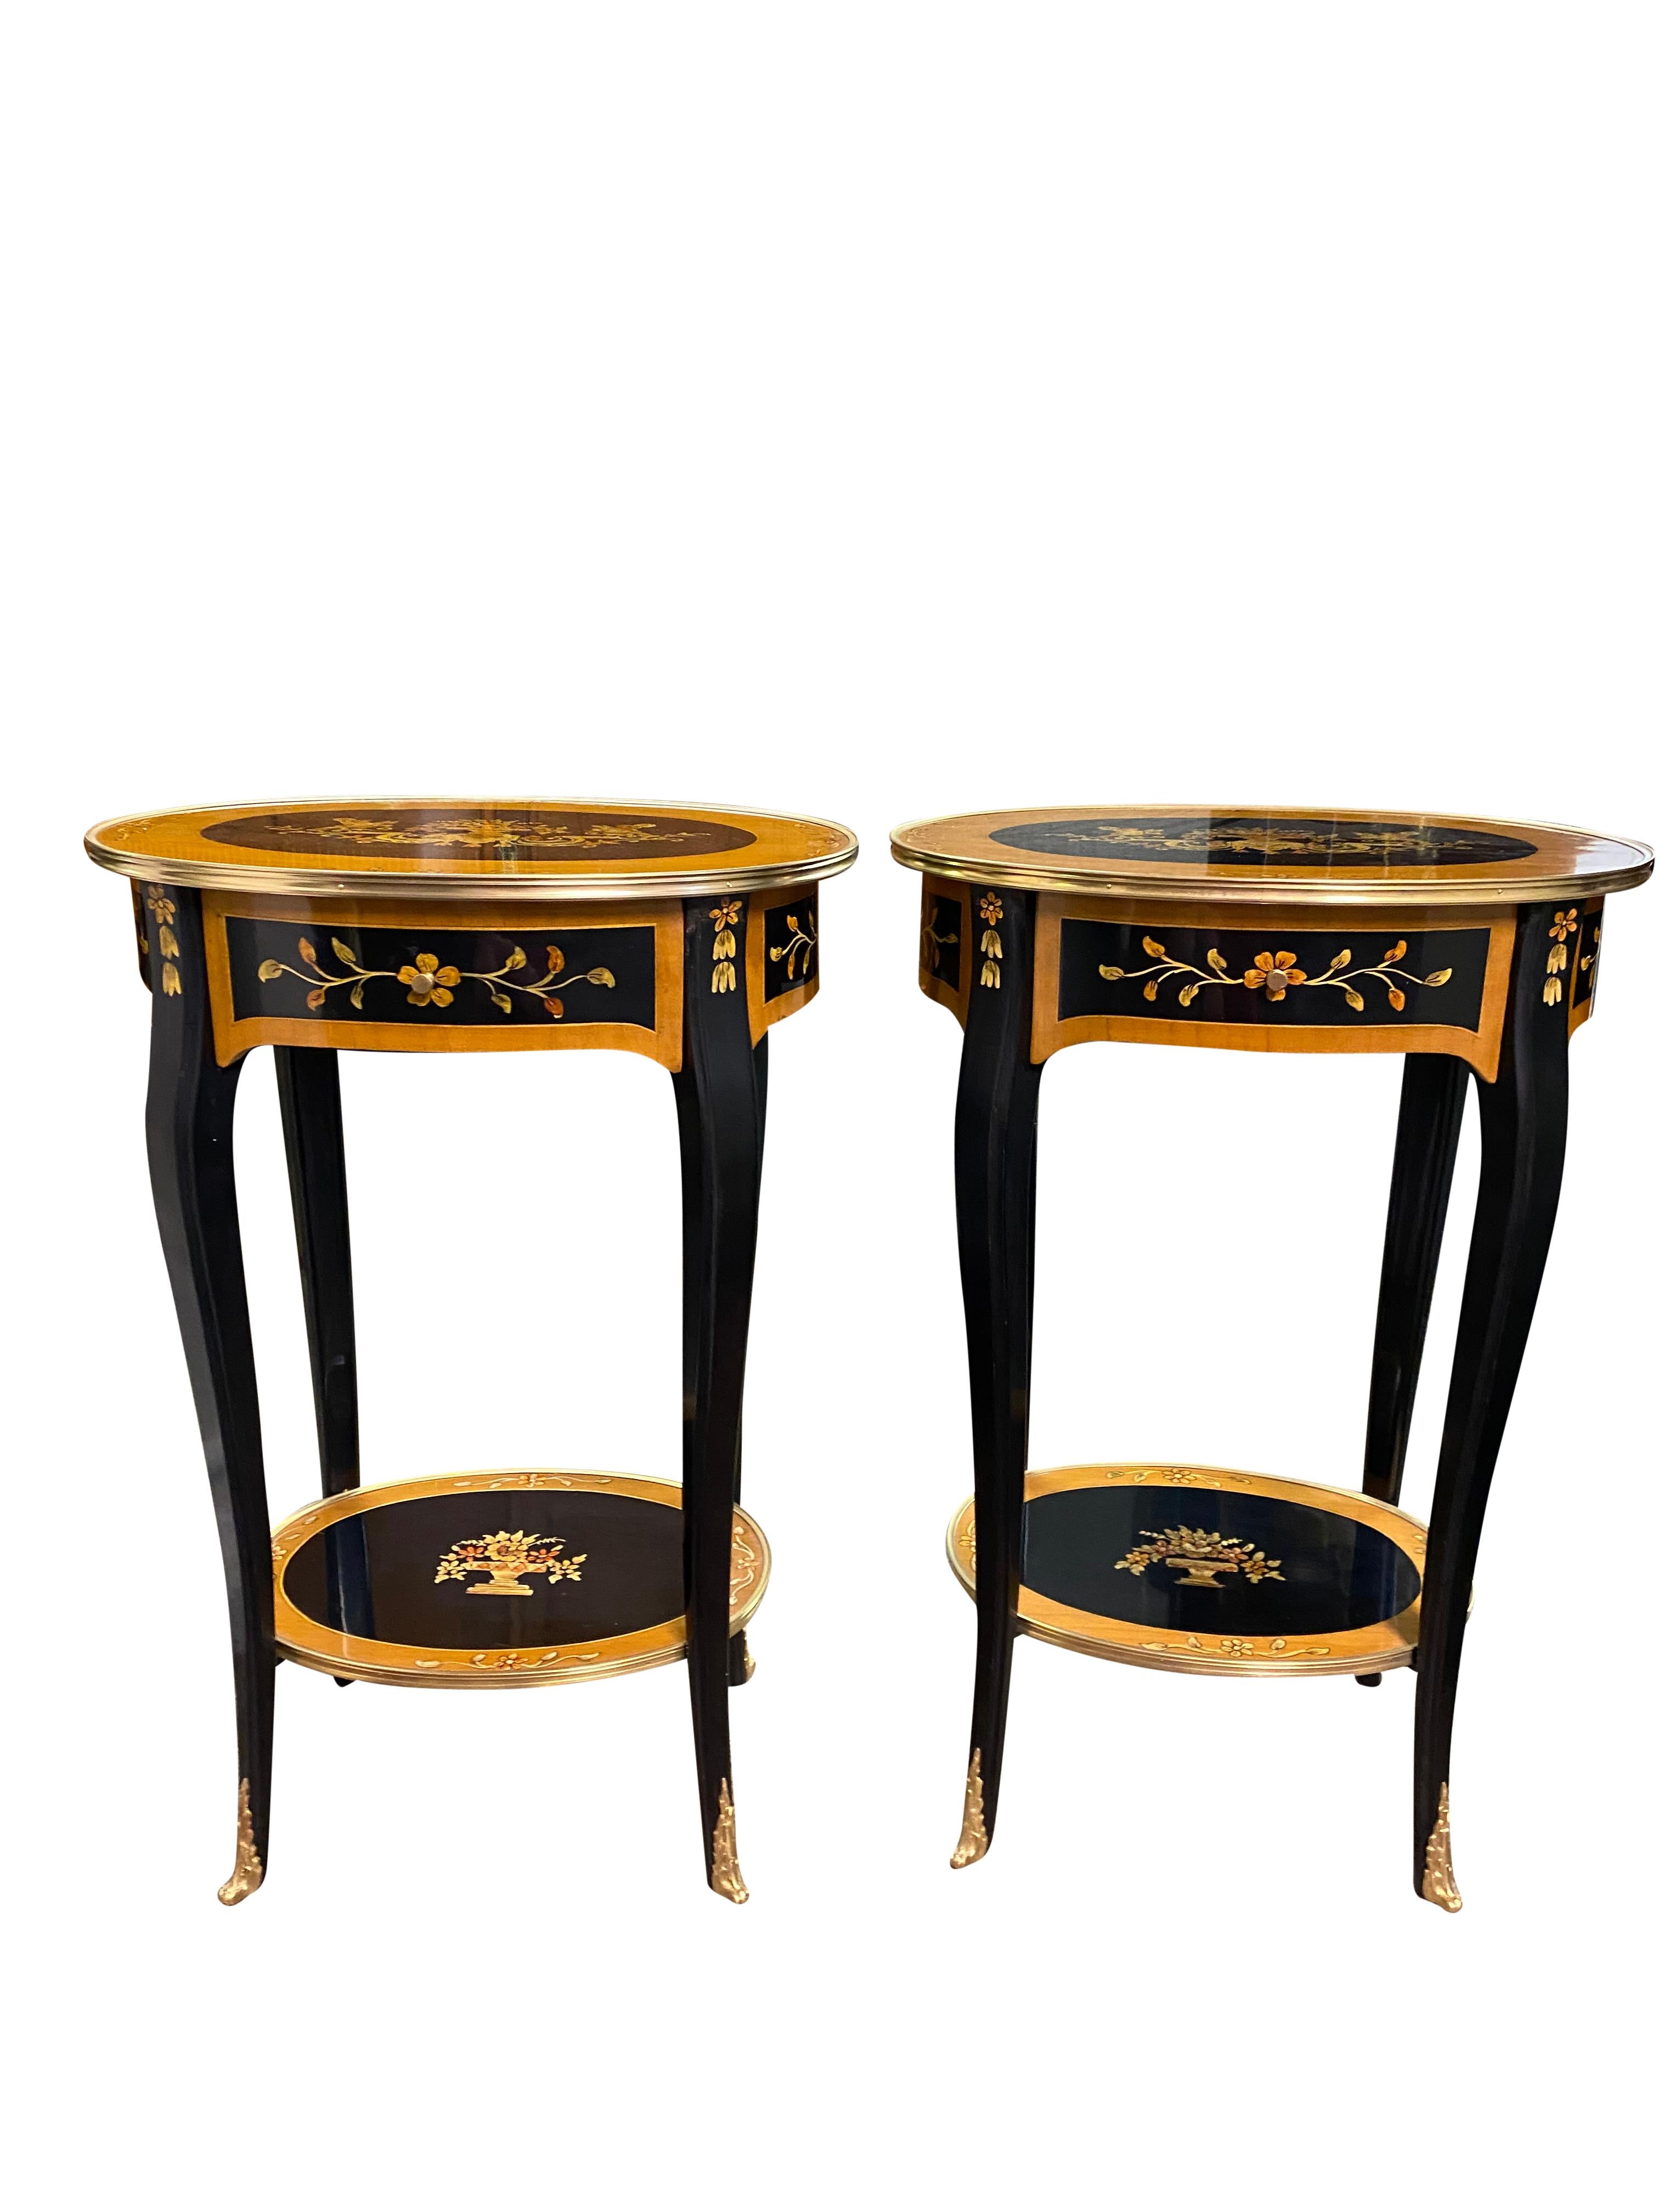 A stunning pair of 20th century French Lacquer style side tables. A gorgeous and elegant design perfect for modern interiors.